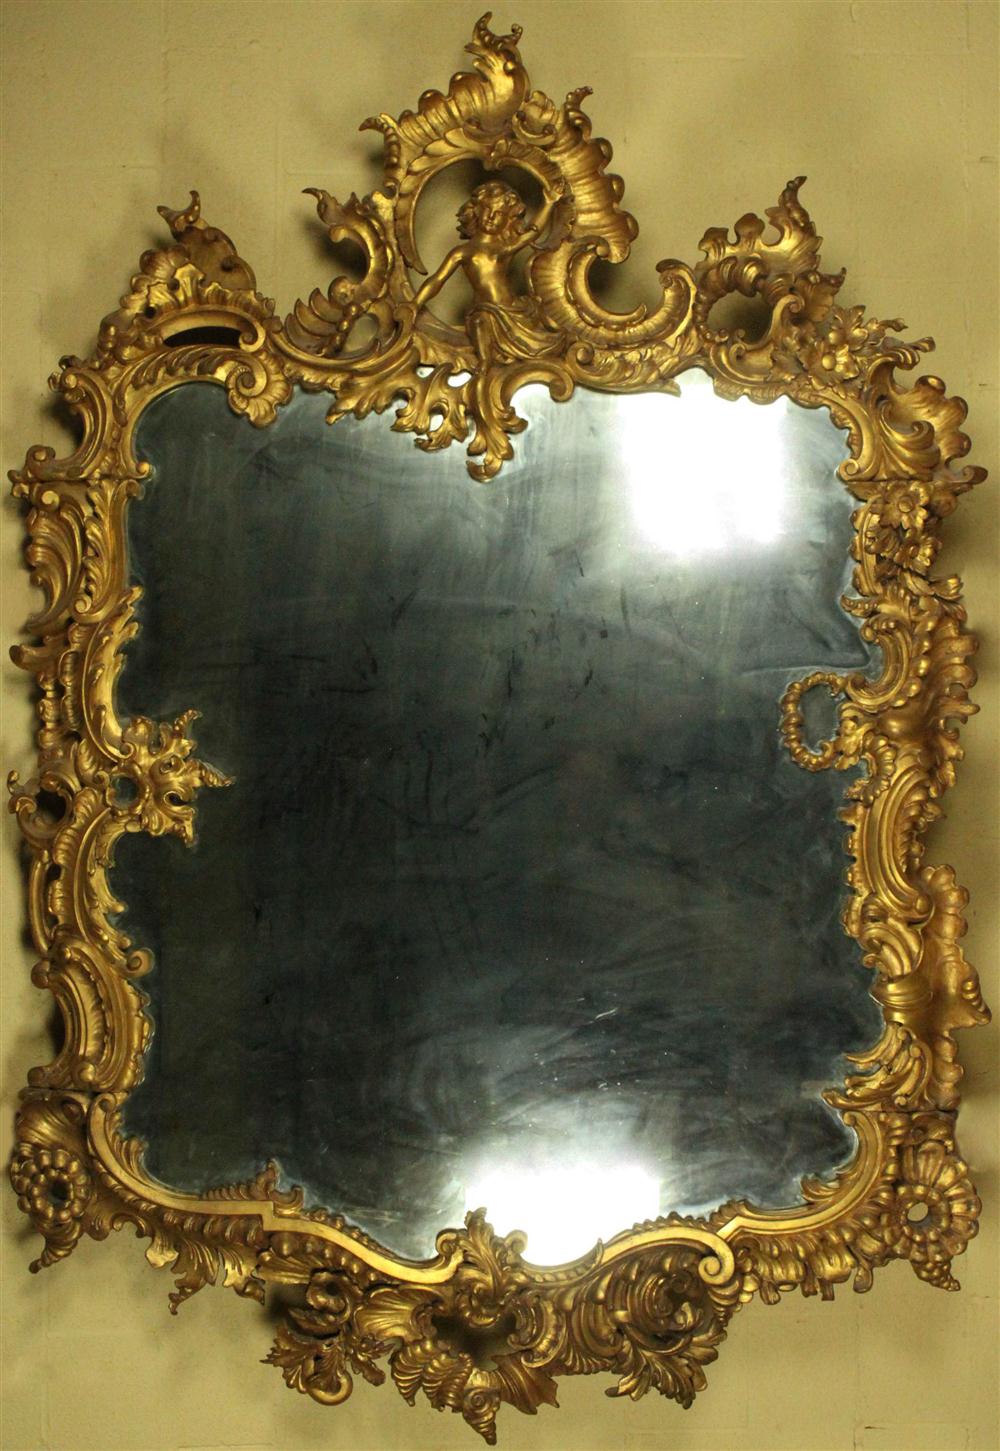 MONUMENTAL ROCOCO STYLE GILDED 146314